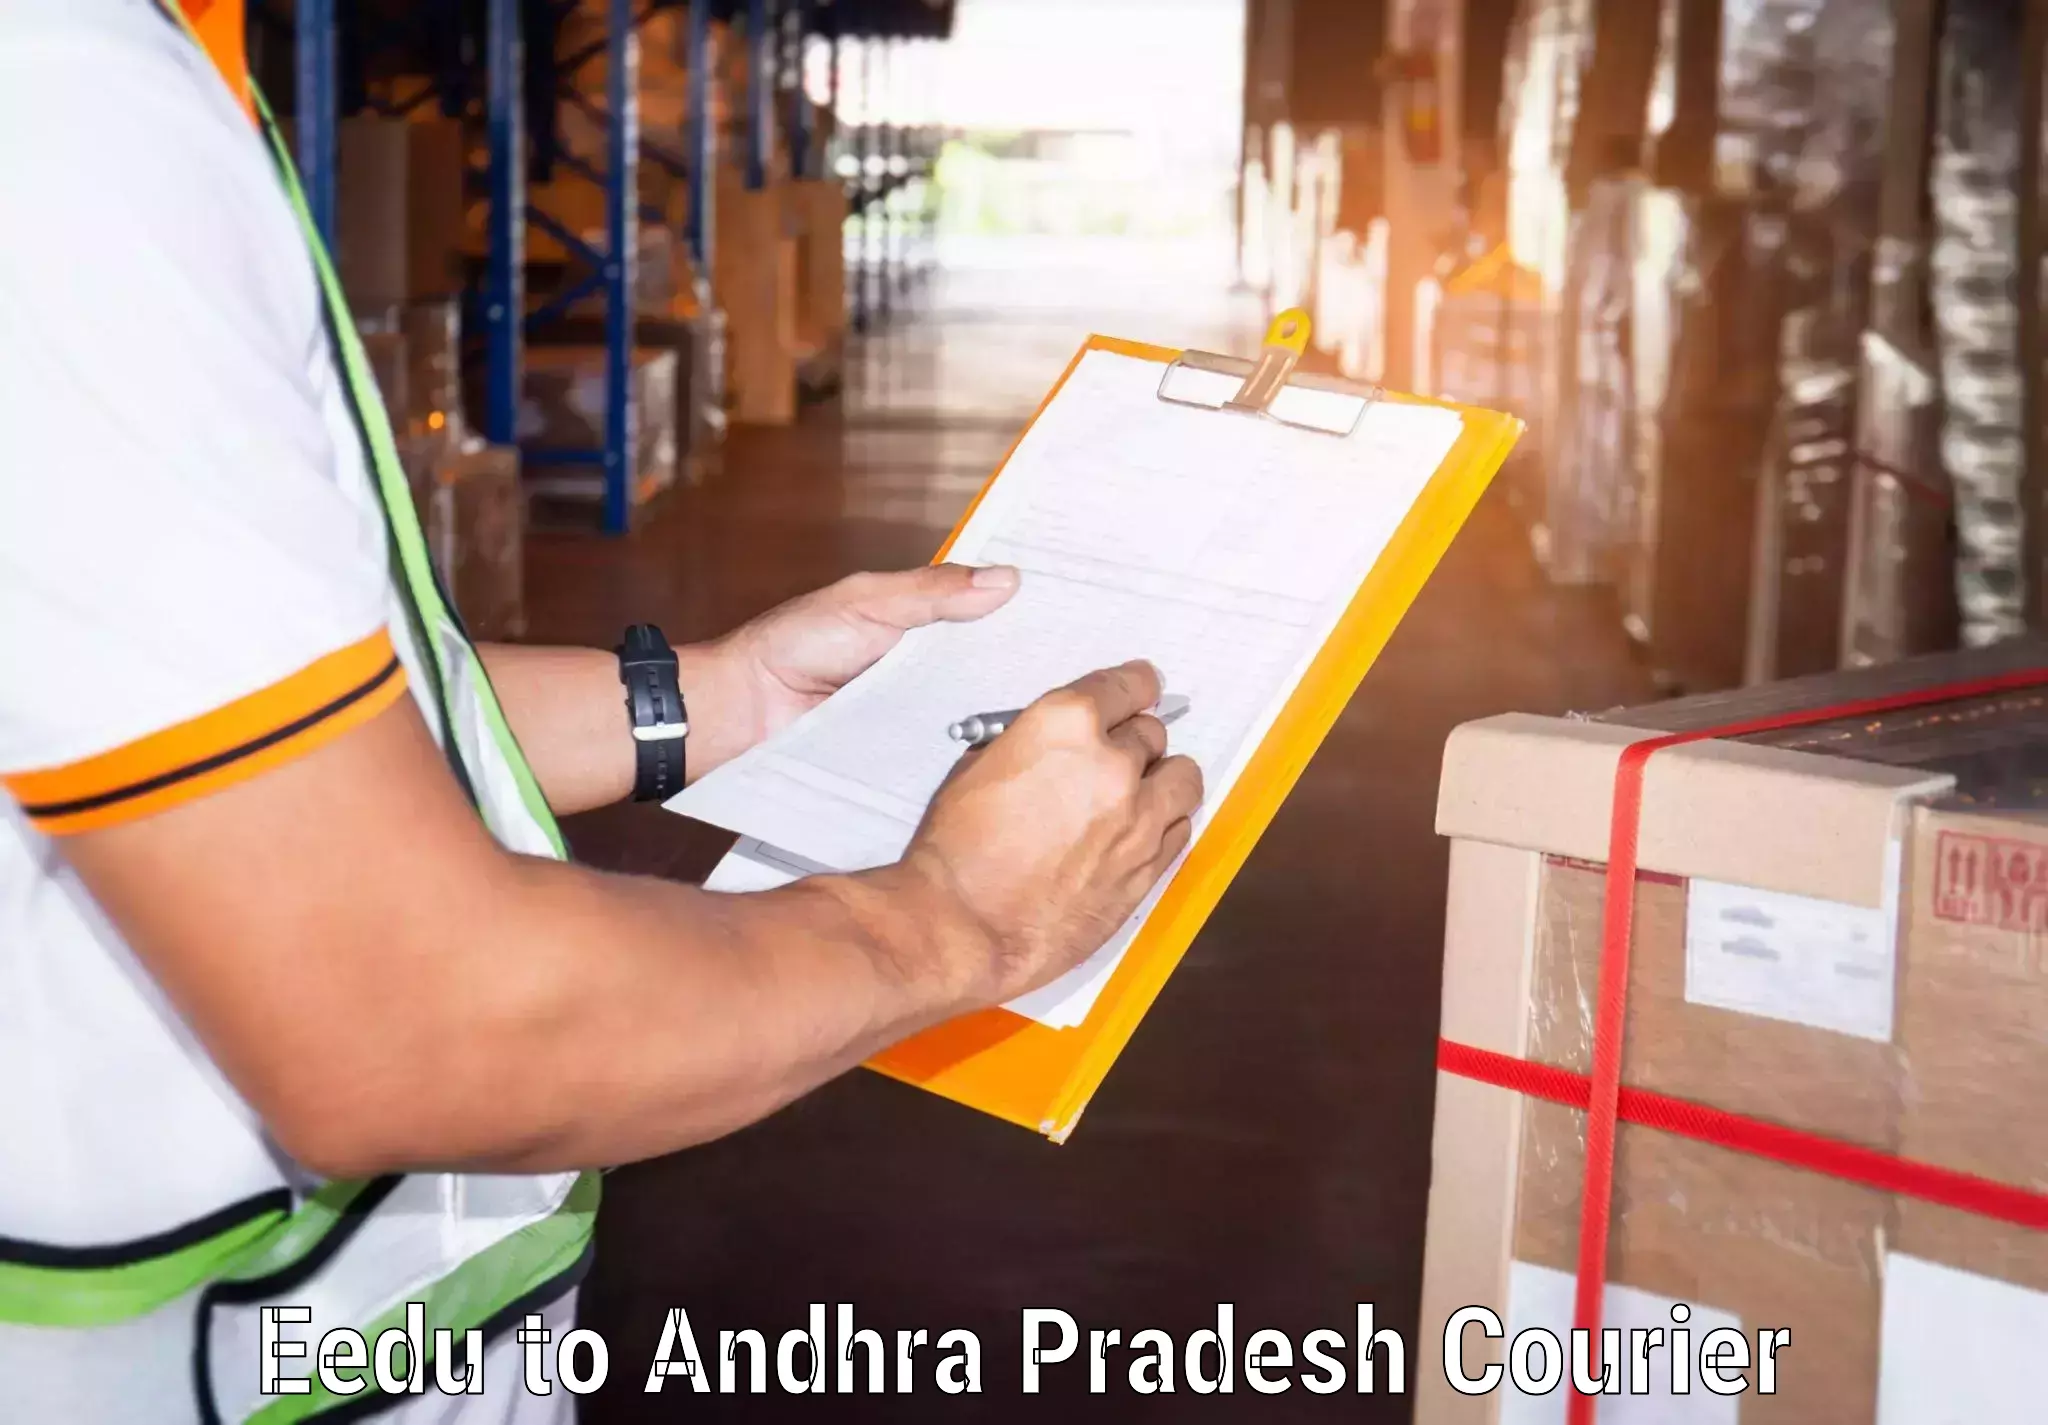 Courier service comparison in Eedu to Palakonda